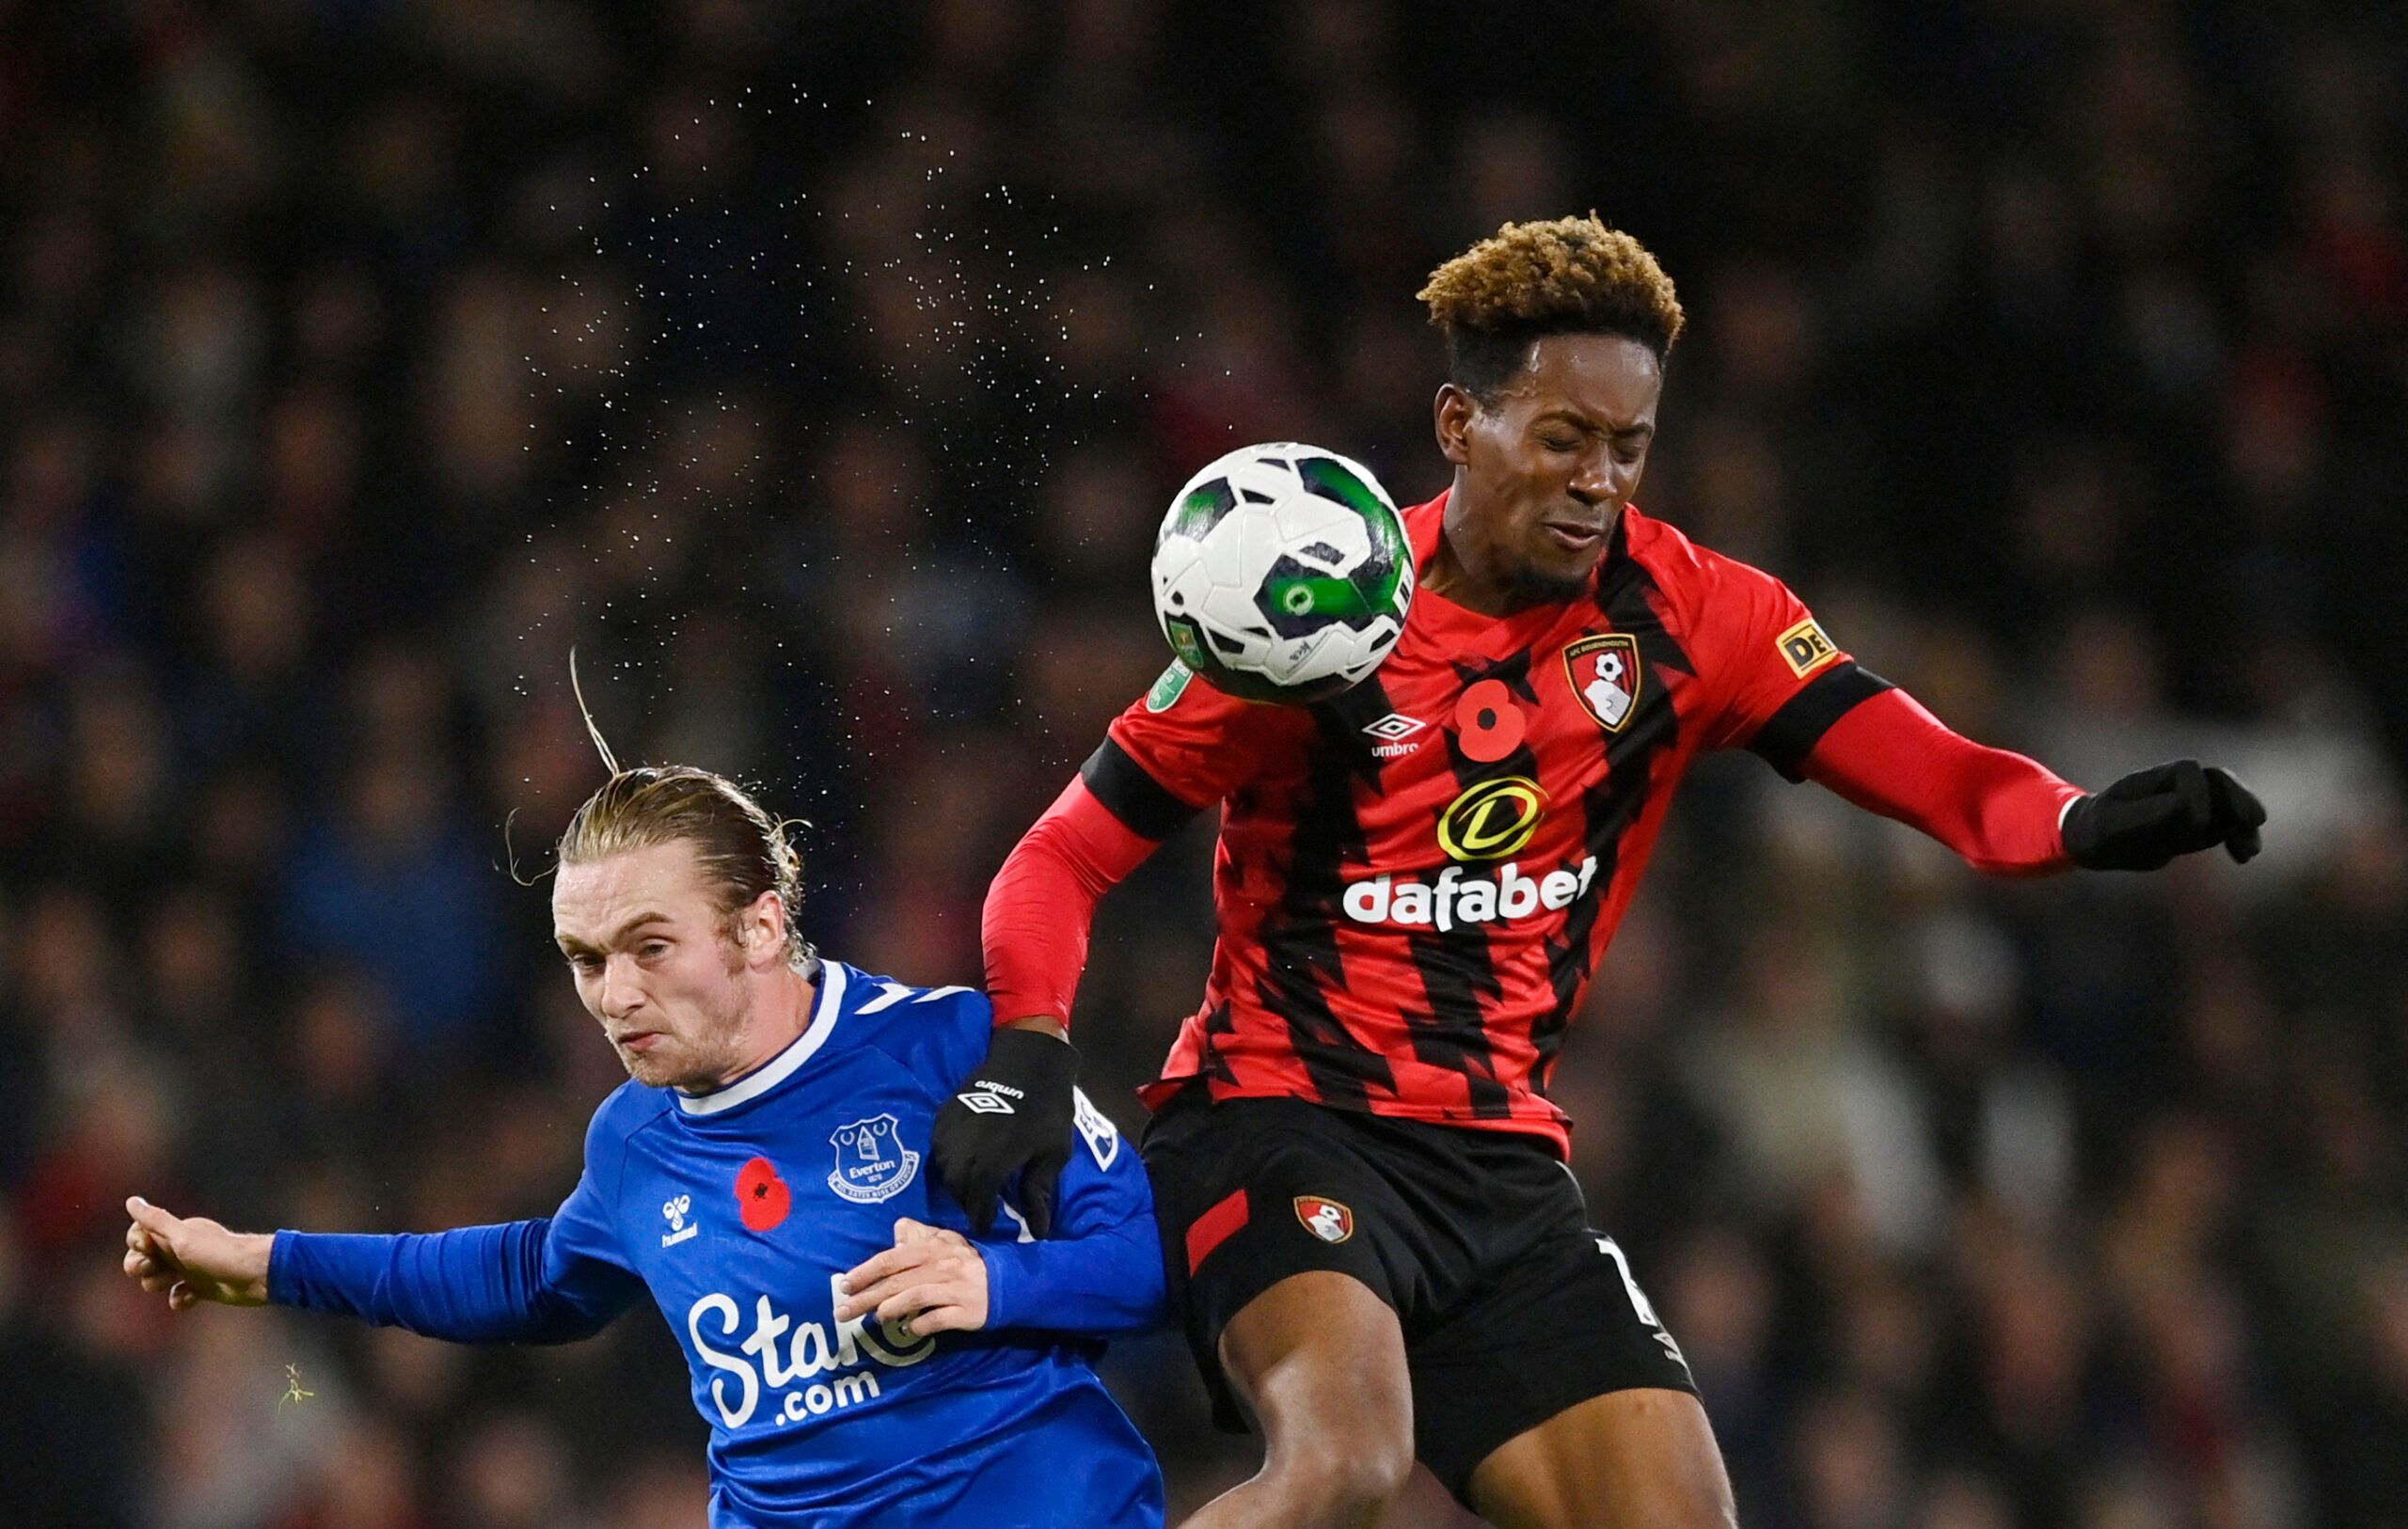 Soccer Football - Carabao Cup Third Round - AFC Bournemouth v Everton - Vitality Stadium, Bournemouth, Britain - November 8, 2022 Everton's Tom Davies in action with AFC Bournemouth's Jamal Lowe REUTERS/Tony Obrien EDITORIAL USE ONLY. No use with unauthorized audio, video, data, fixture lists, club/league logos or 'live' services. Online in-match use limited to 75 images, no video emulation. No use in betting, games or single club /league/player publications.  Please contact your account represe